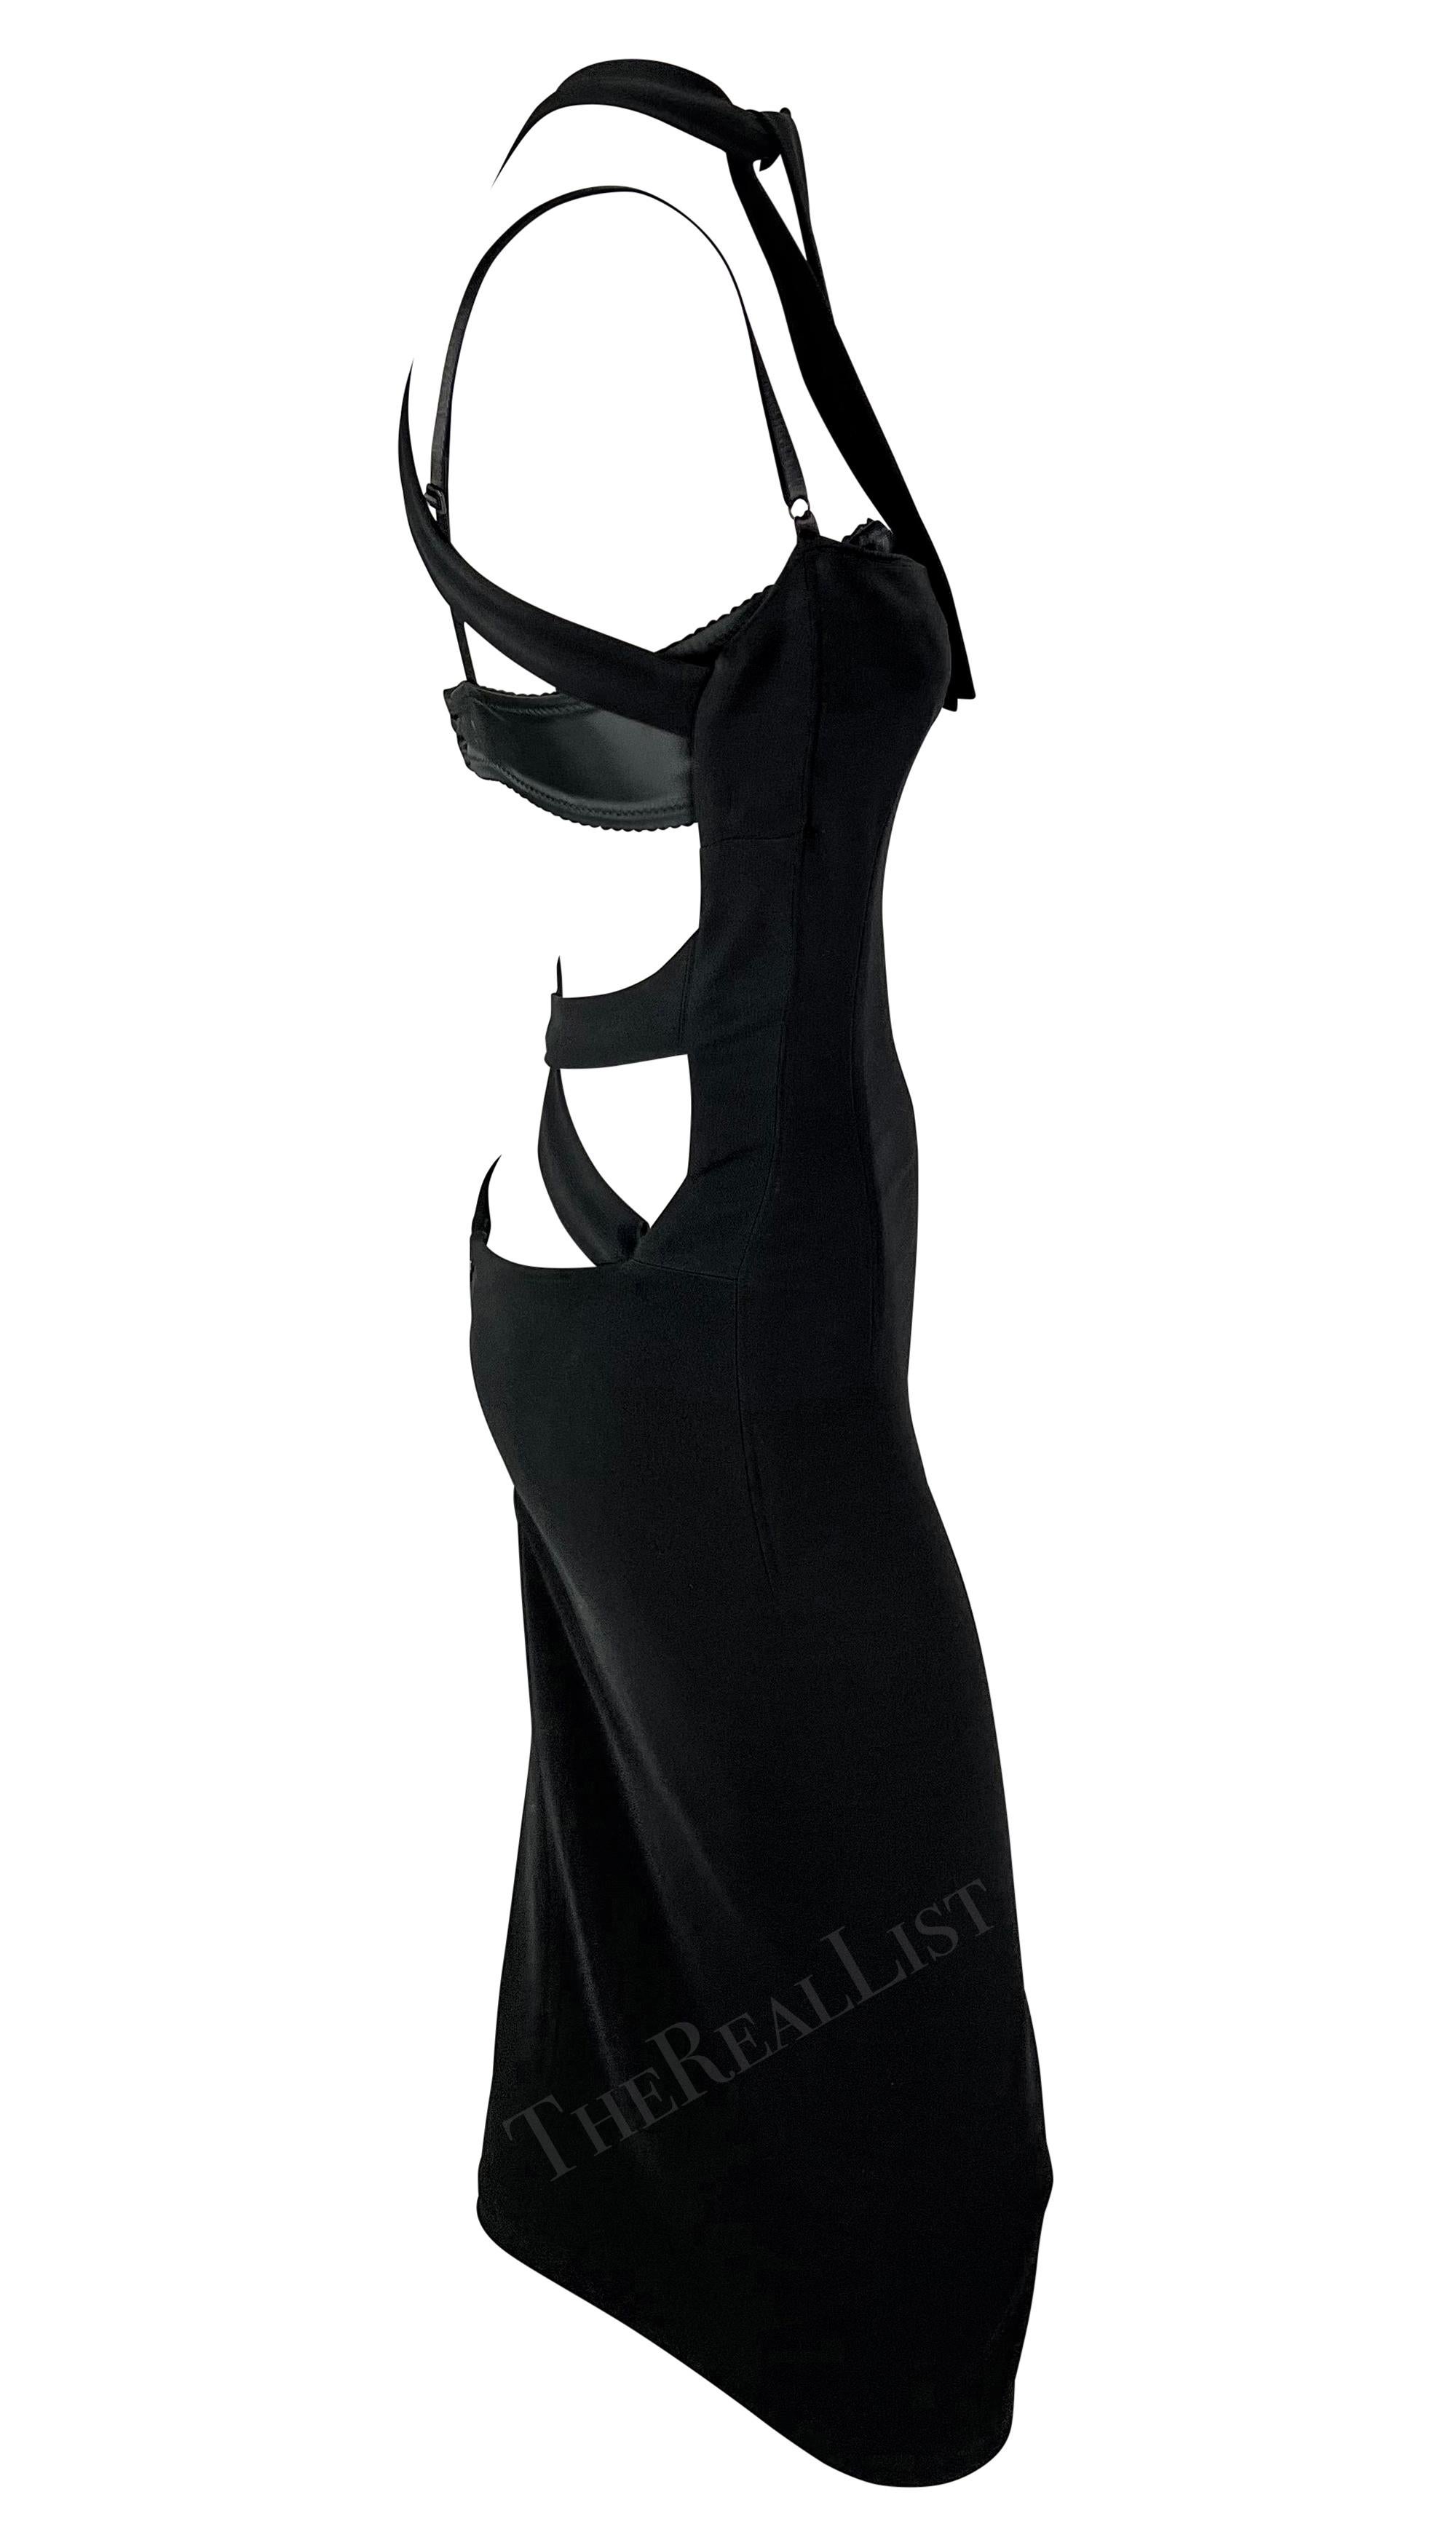 S/S 2001 Dolce & Gabbana Black Bodycon Strap Backless Runway Dress In Excellent Condition For Sale In West Hollywood, CA